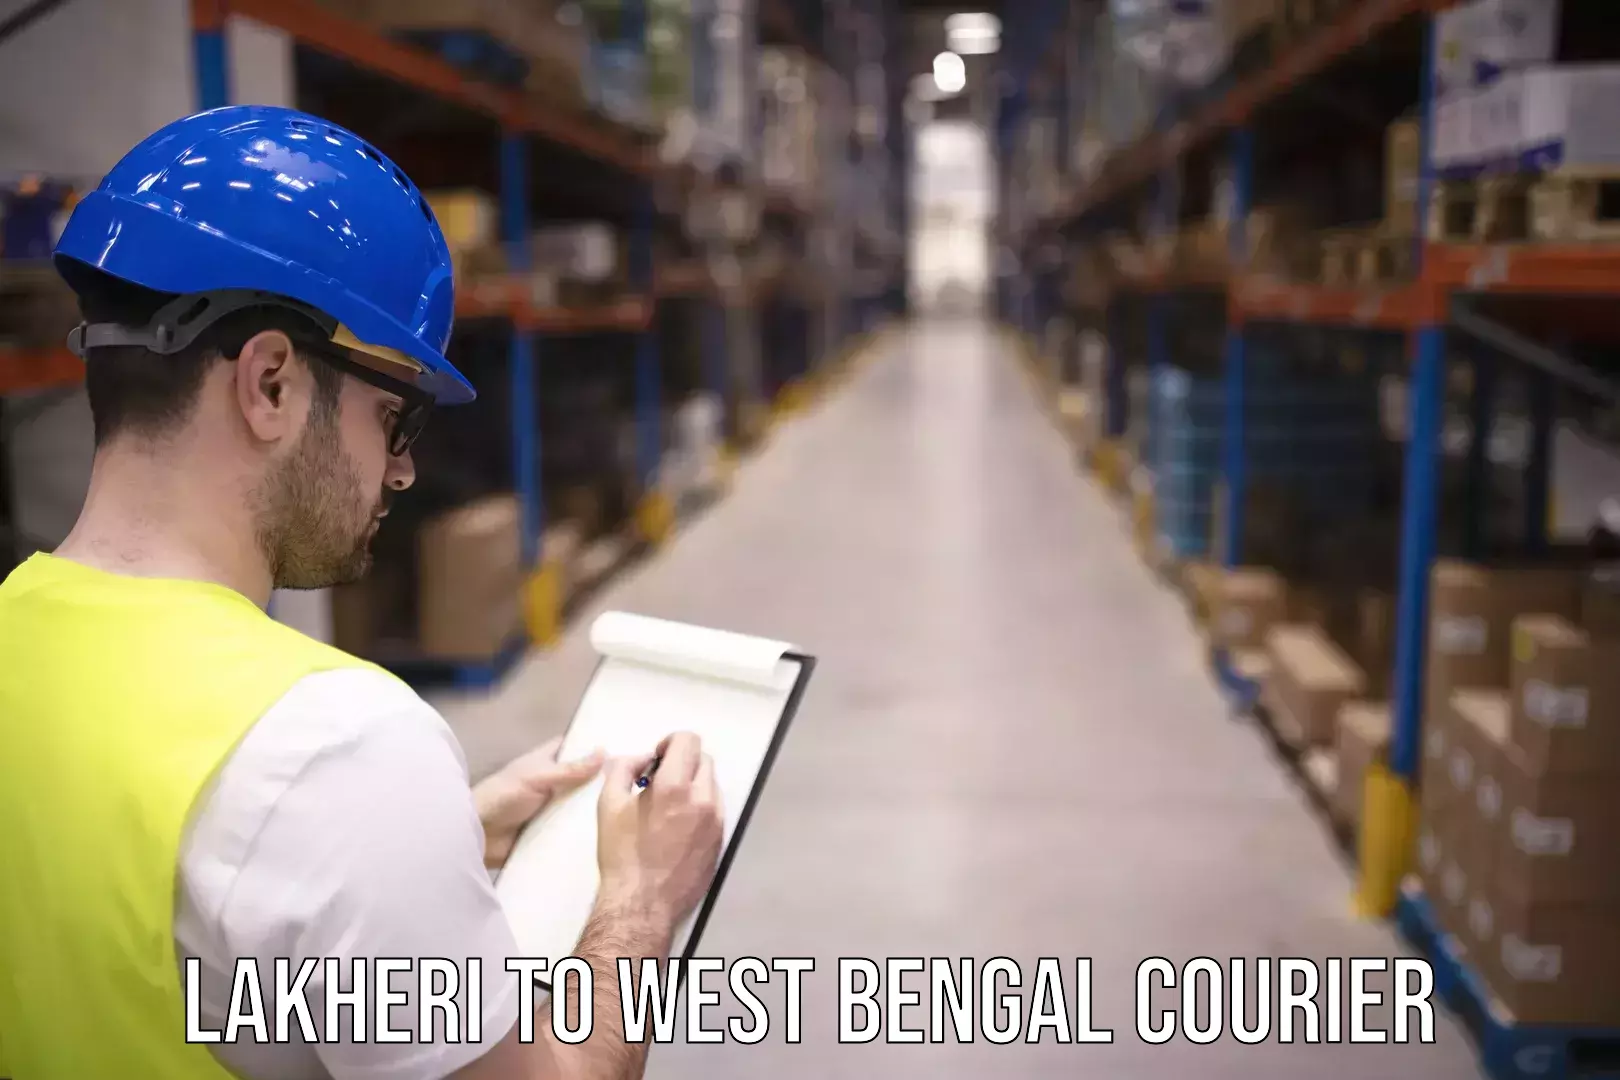 Customer-centric shipping Lakheri to West Bengal